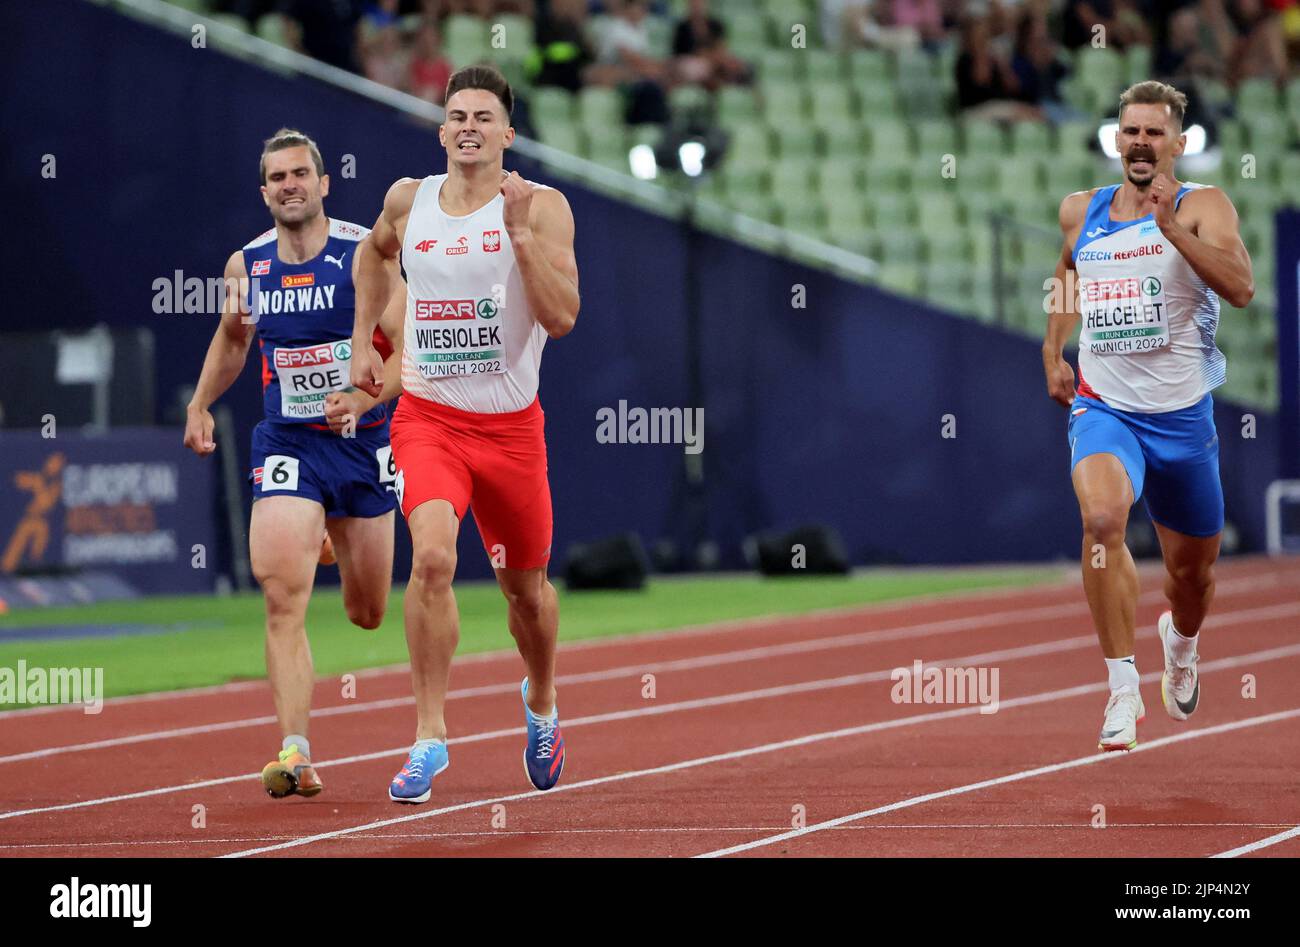 Athletics - 2022 European Championships - Olympiastadion, Munich, Germany - August 15, 2022 Poland's Pawel Wiesiolek and Czech Republic's Adam Helcelet  in action during the men's decathlon 400m heats REUTERS/Wolfgang Rattay Stock Photo